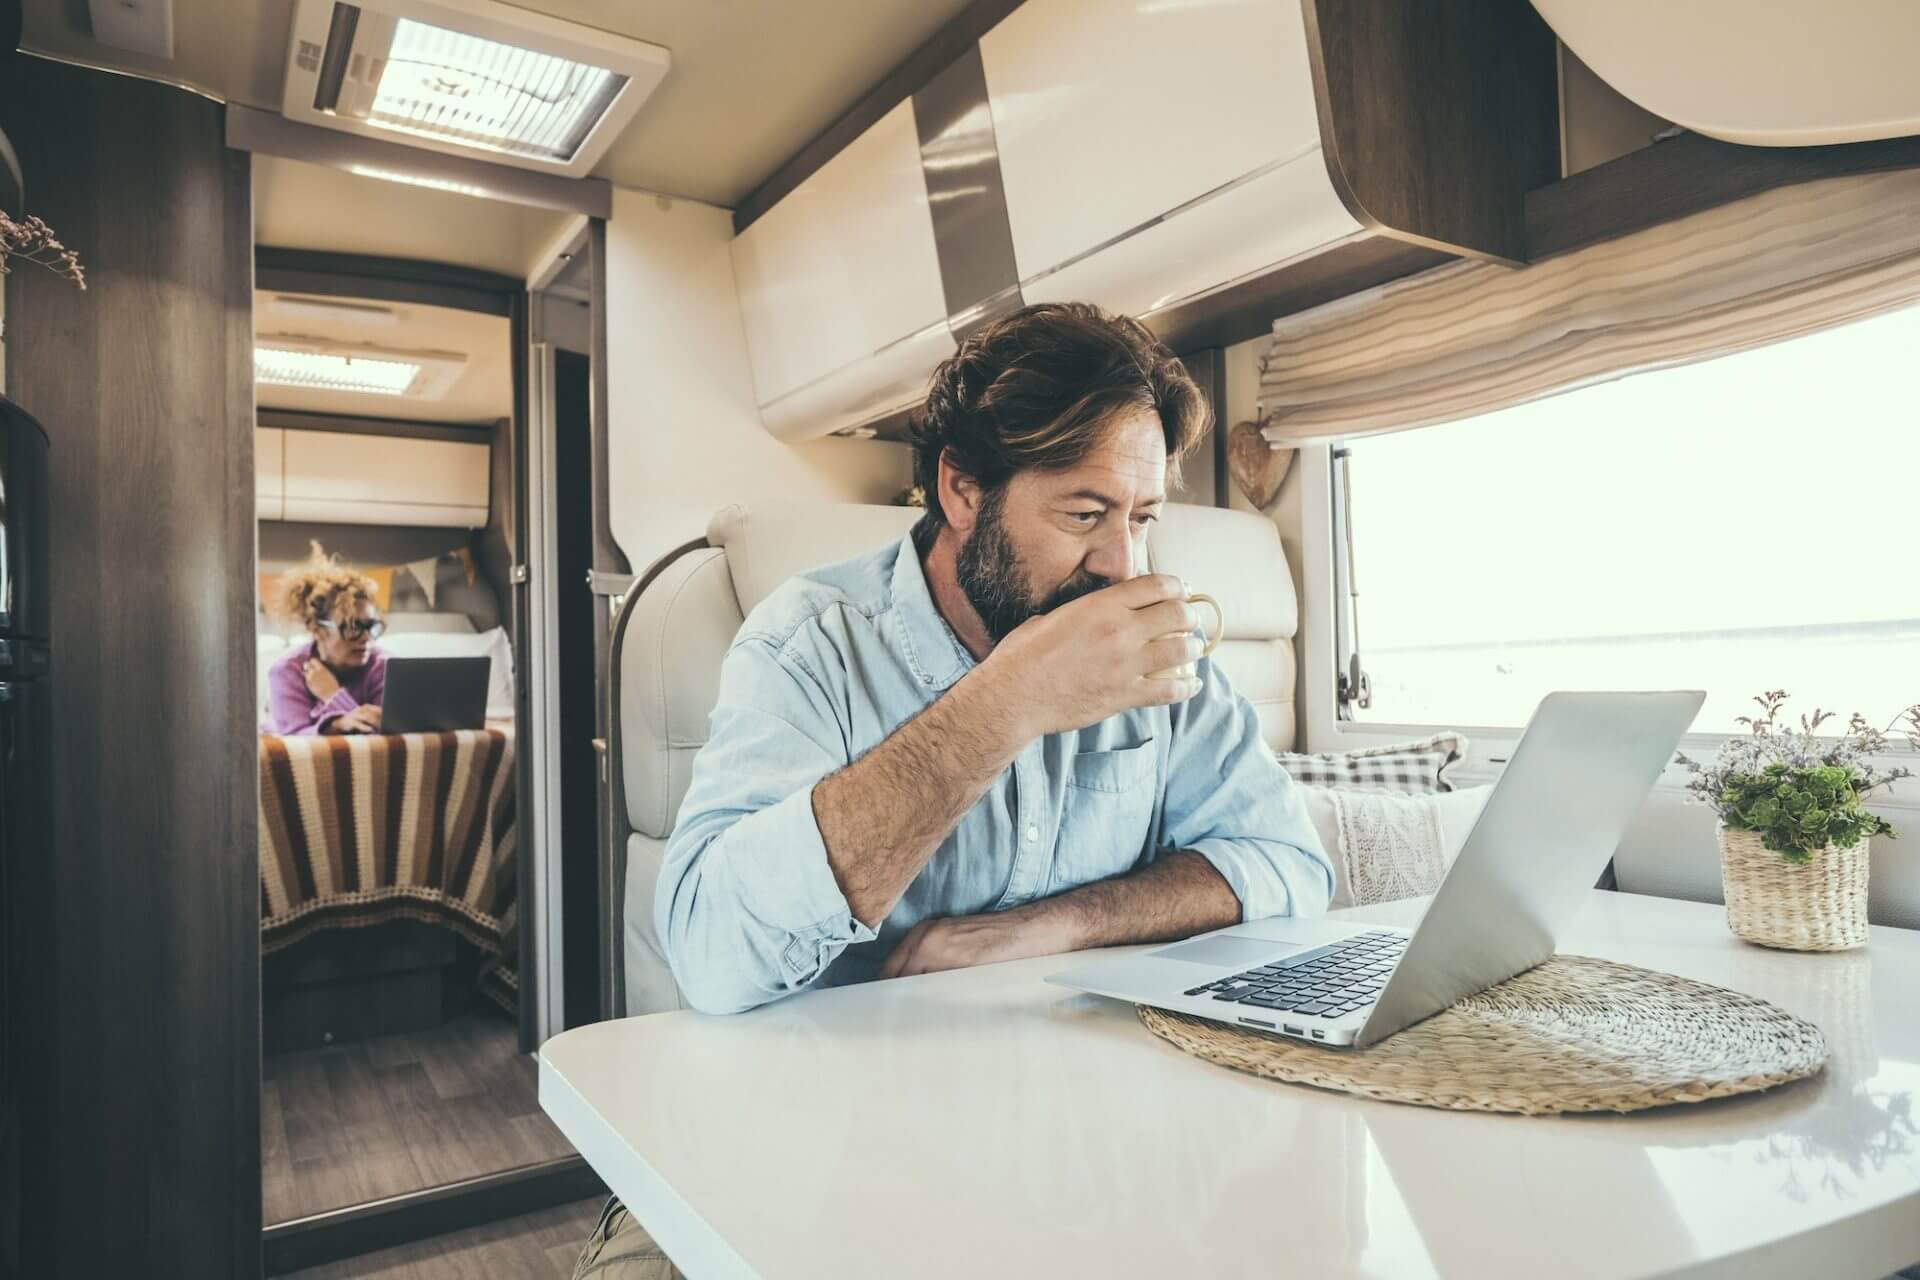 Couple use computer inside camper van during travel vacation or van life lifestyle.